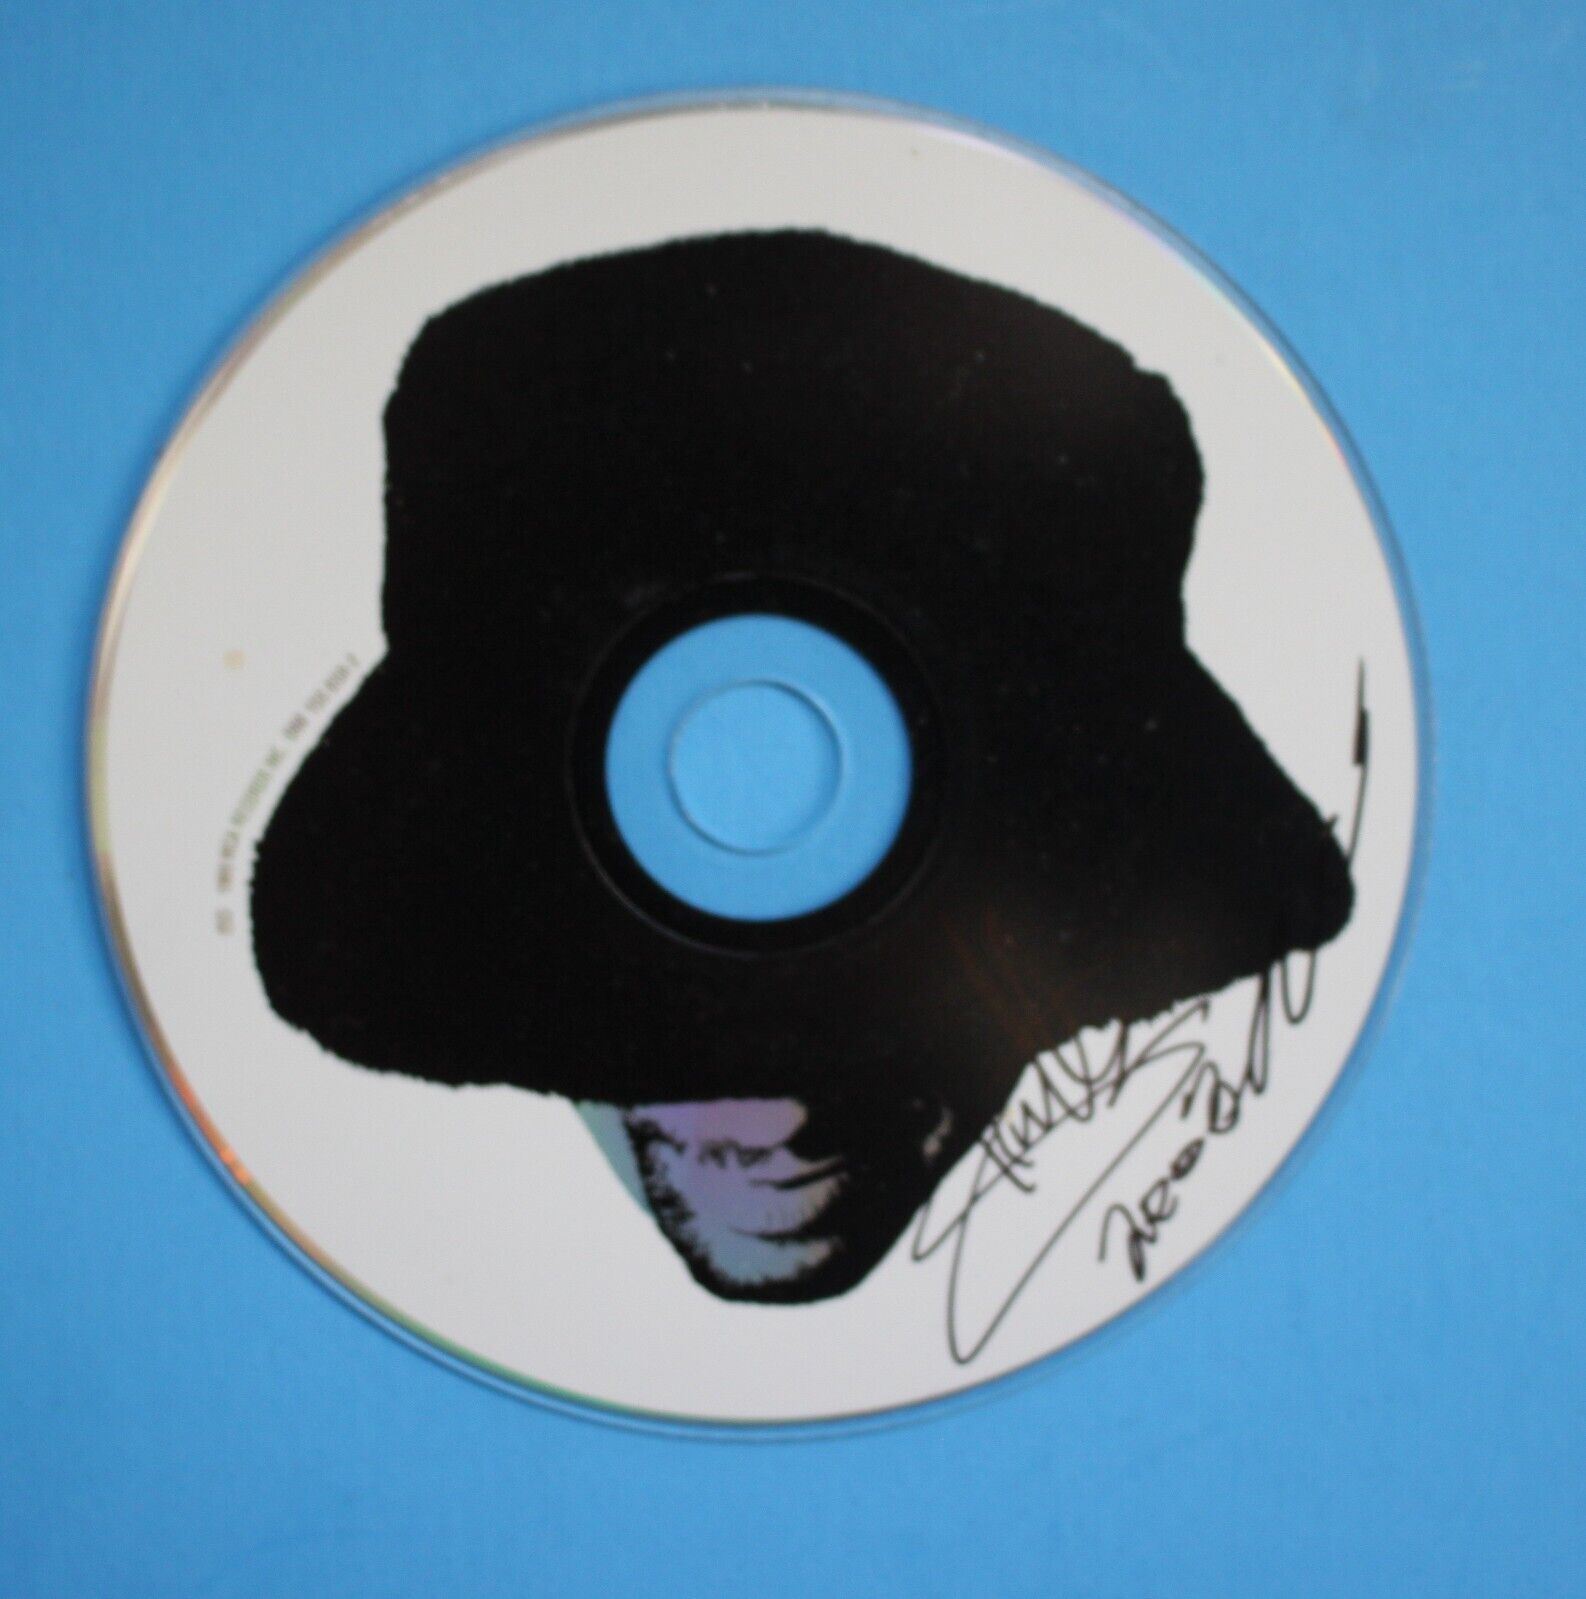 Autographed Hand Signed SHAGGY CD Disc